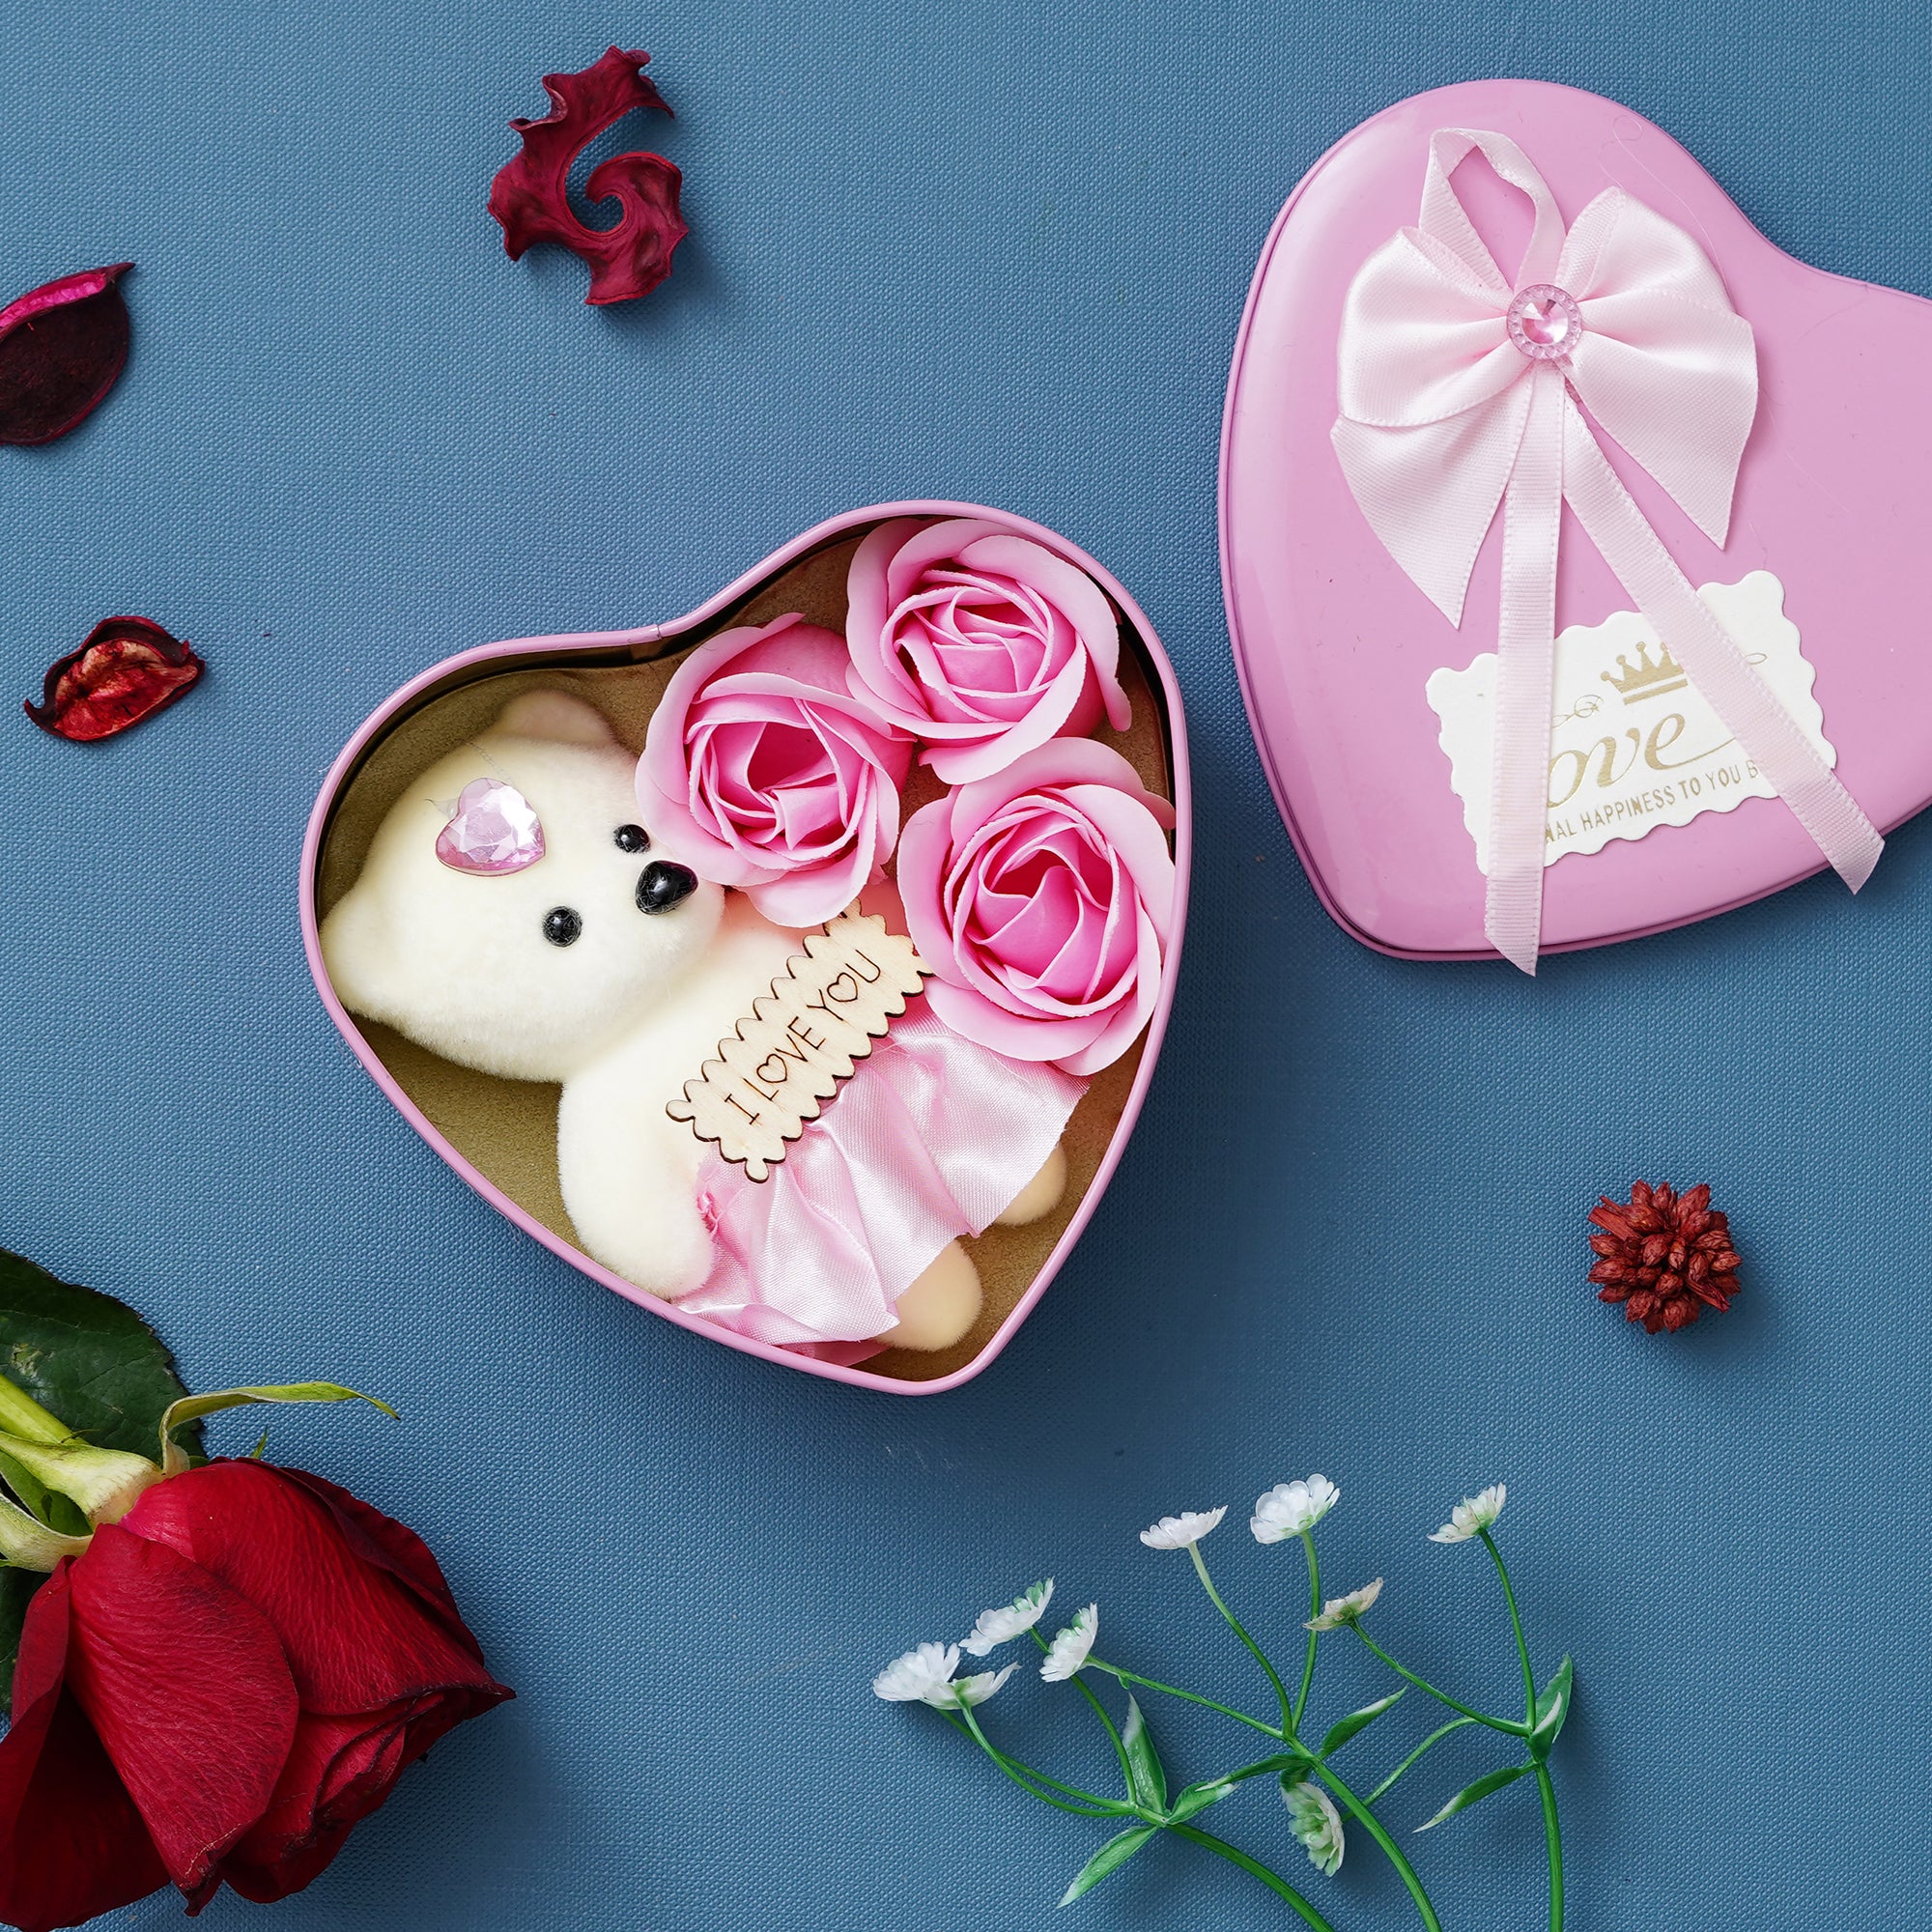 Pink Heart Shaped Gift Box With 3 Pink Roses, Teddy Bear, And A Card 1